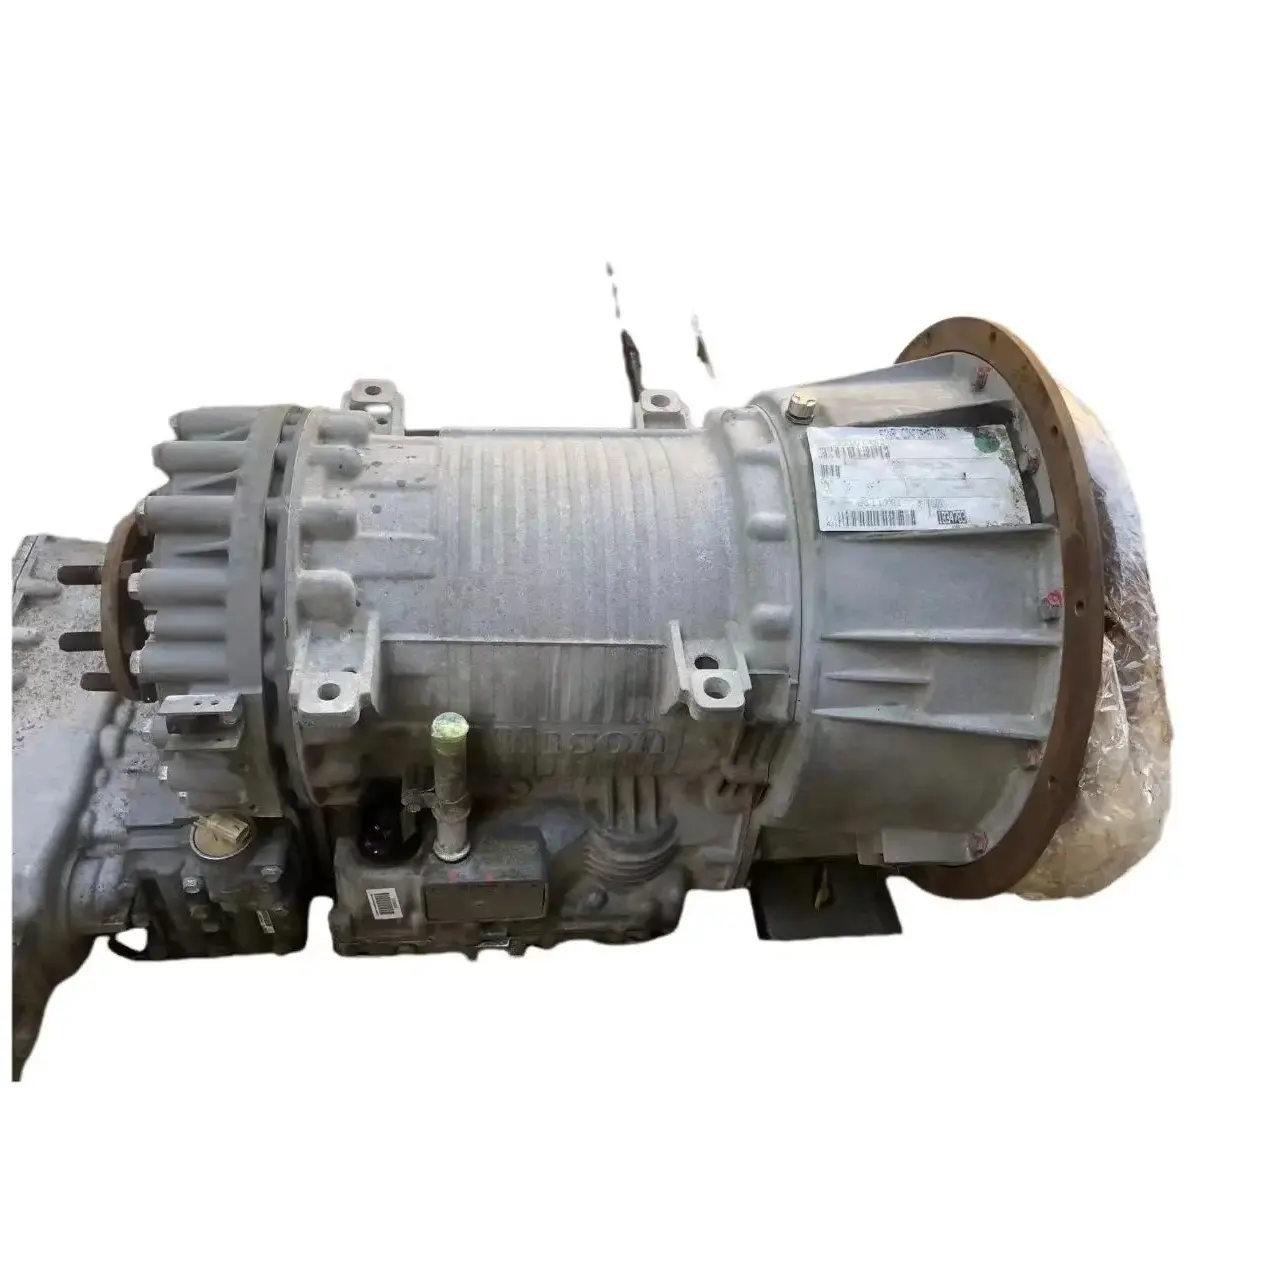 UAS import USED Allison BUS TRUCK transmission cheap price From China for Allison 1000